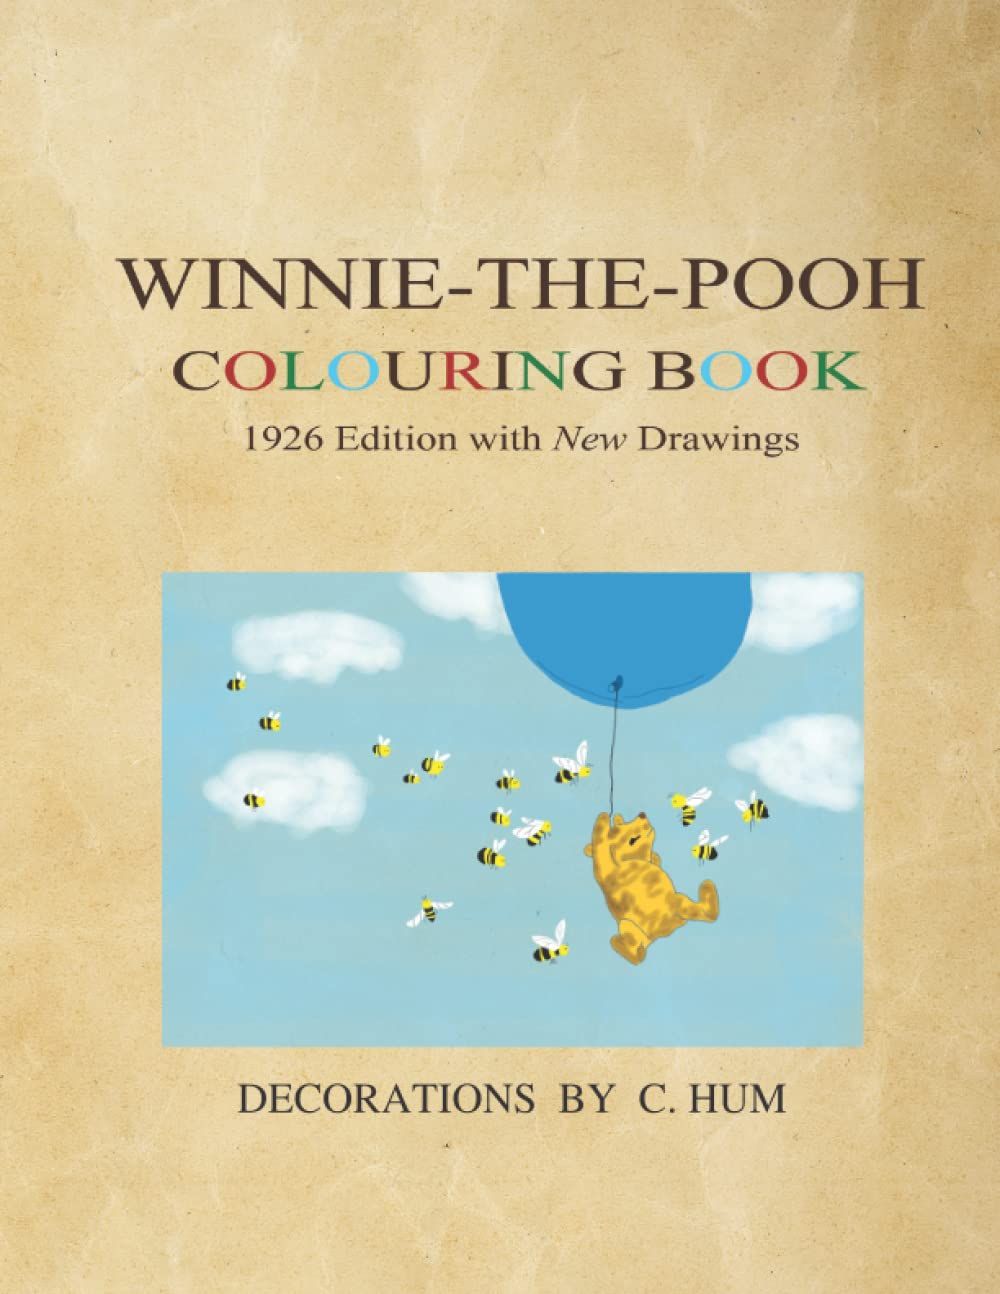 WINNIE-THE-POOH COLOURING BOOK: 1926 Edition with New Drawings (Winnie-the-Pooh Series)     Paper... | Amazon (US)